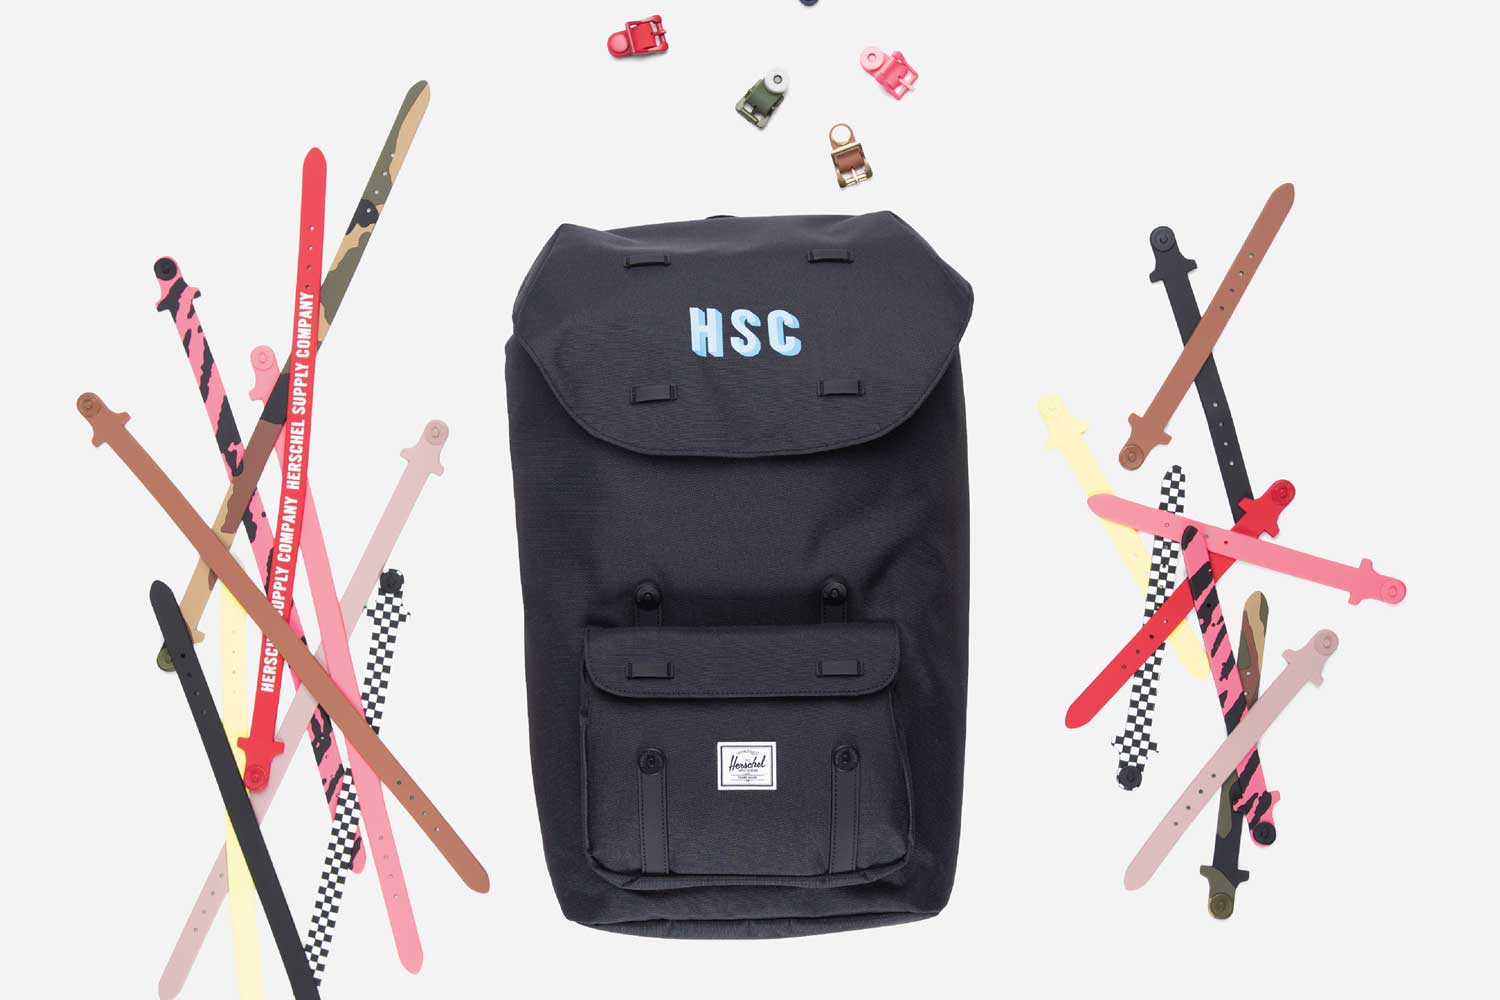 Start with the classic backpack - Choose your favorite color